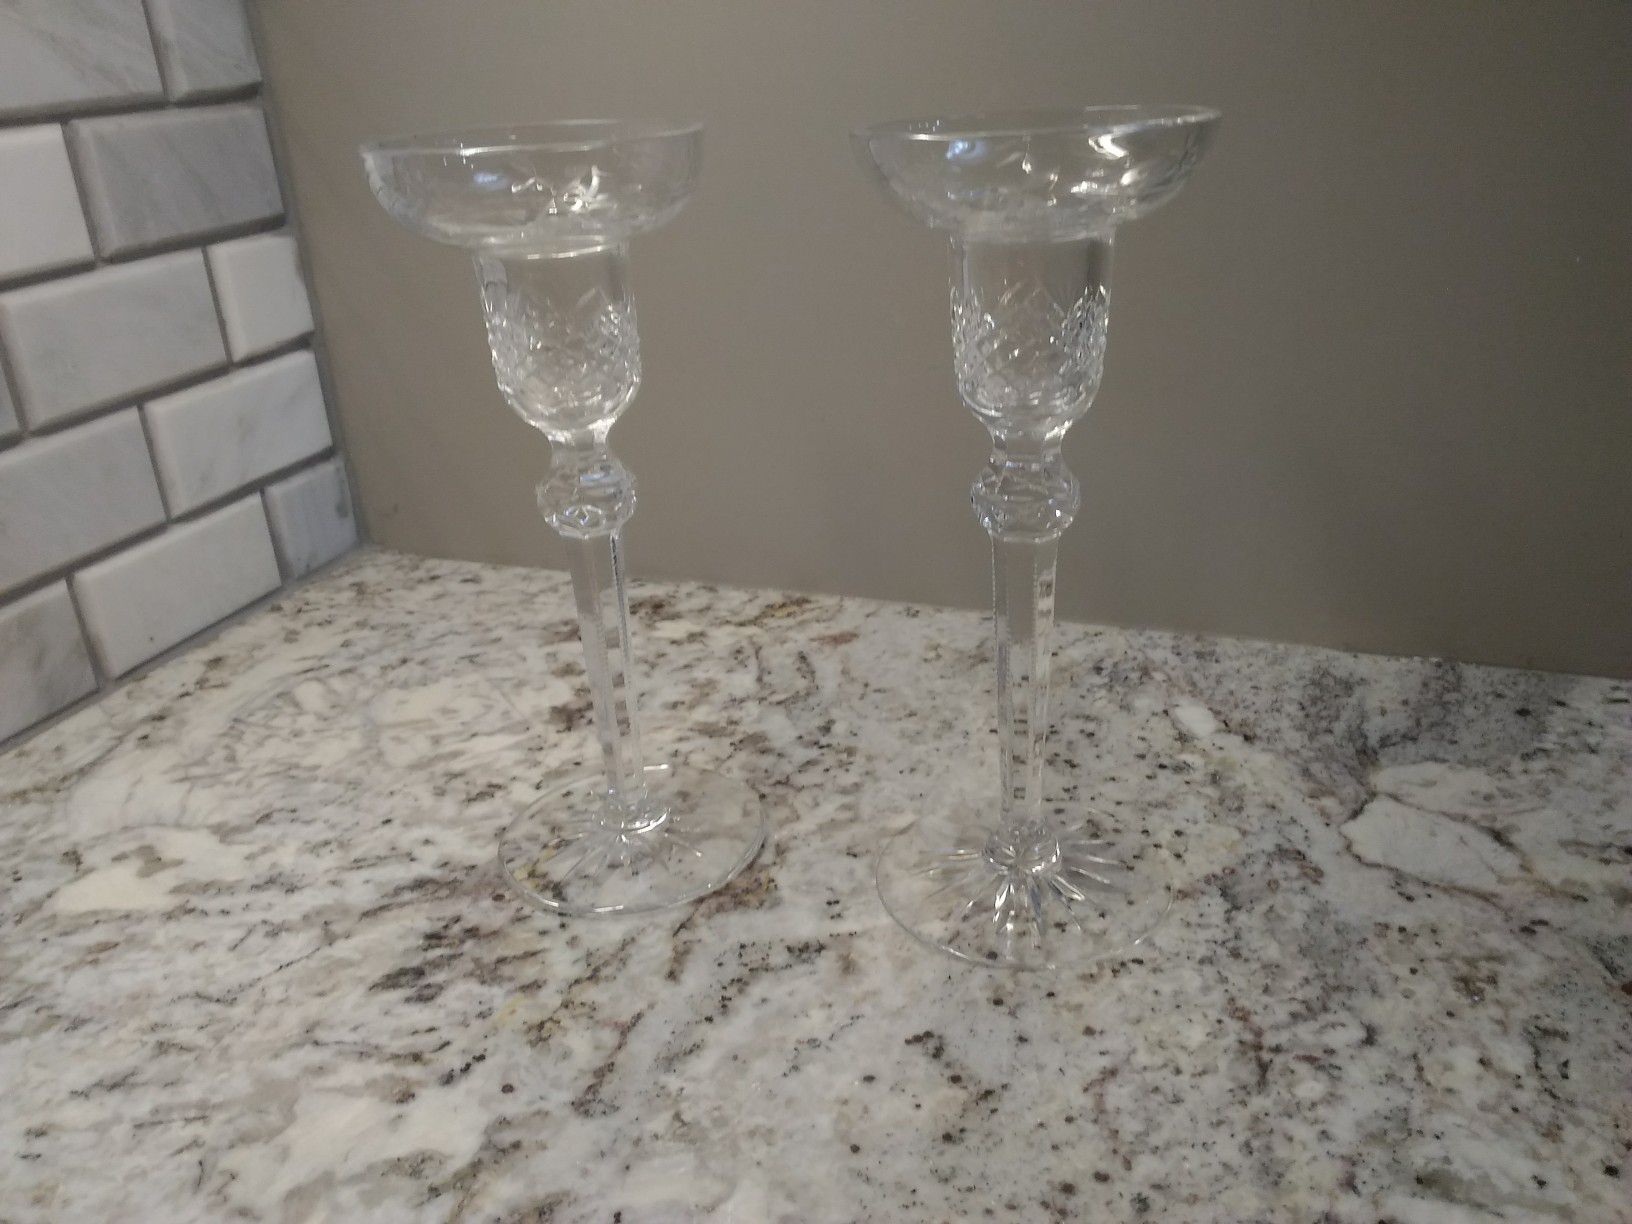 A pair of Wedgwood Crystal Candleholders / Candle Holders / Candlesticks / Candle Sticks